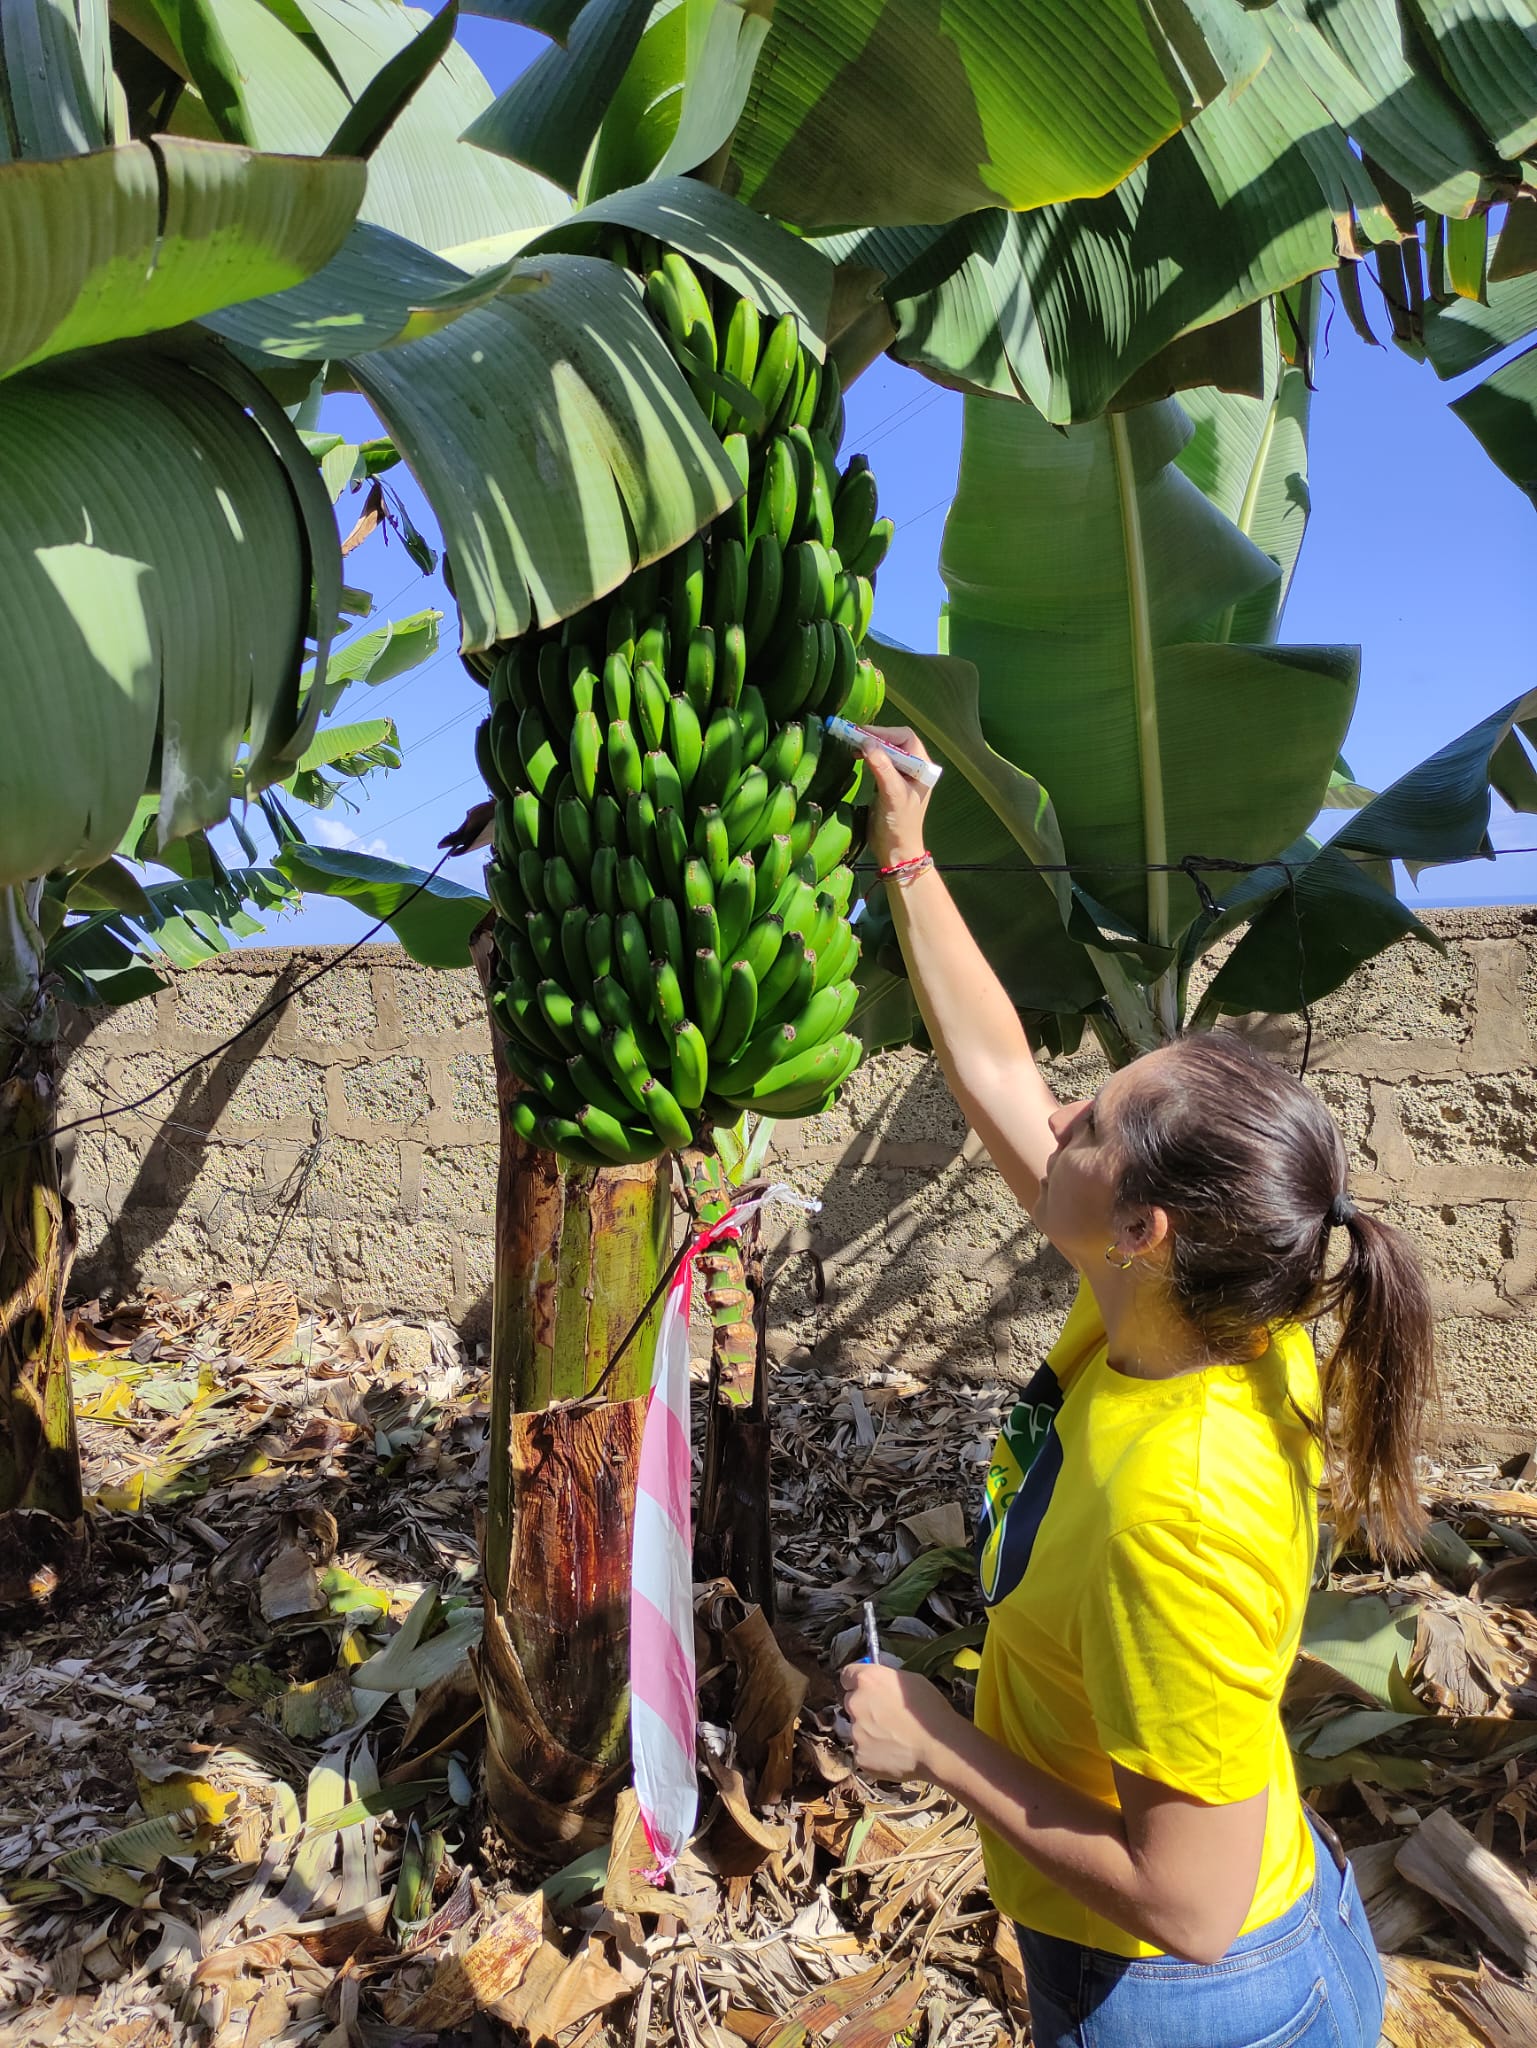 ASPROCAN launches project for greater sustainability in Canary Islands banana supply